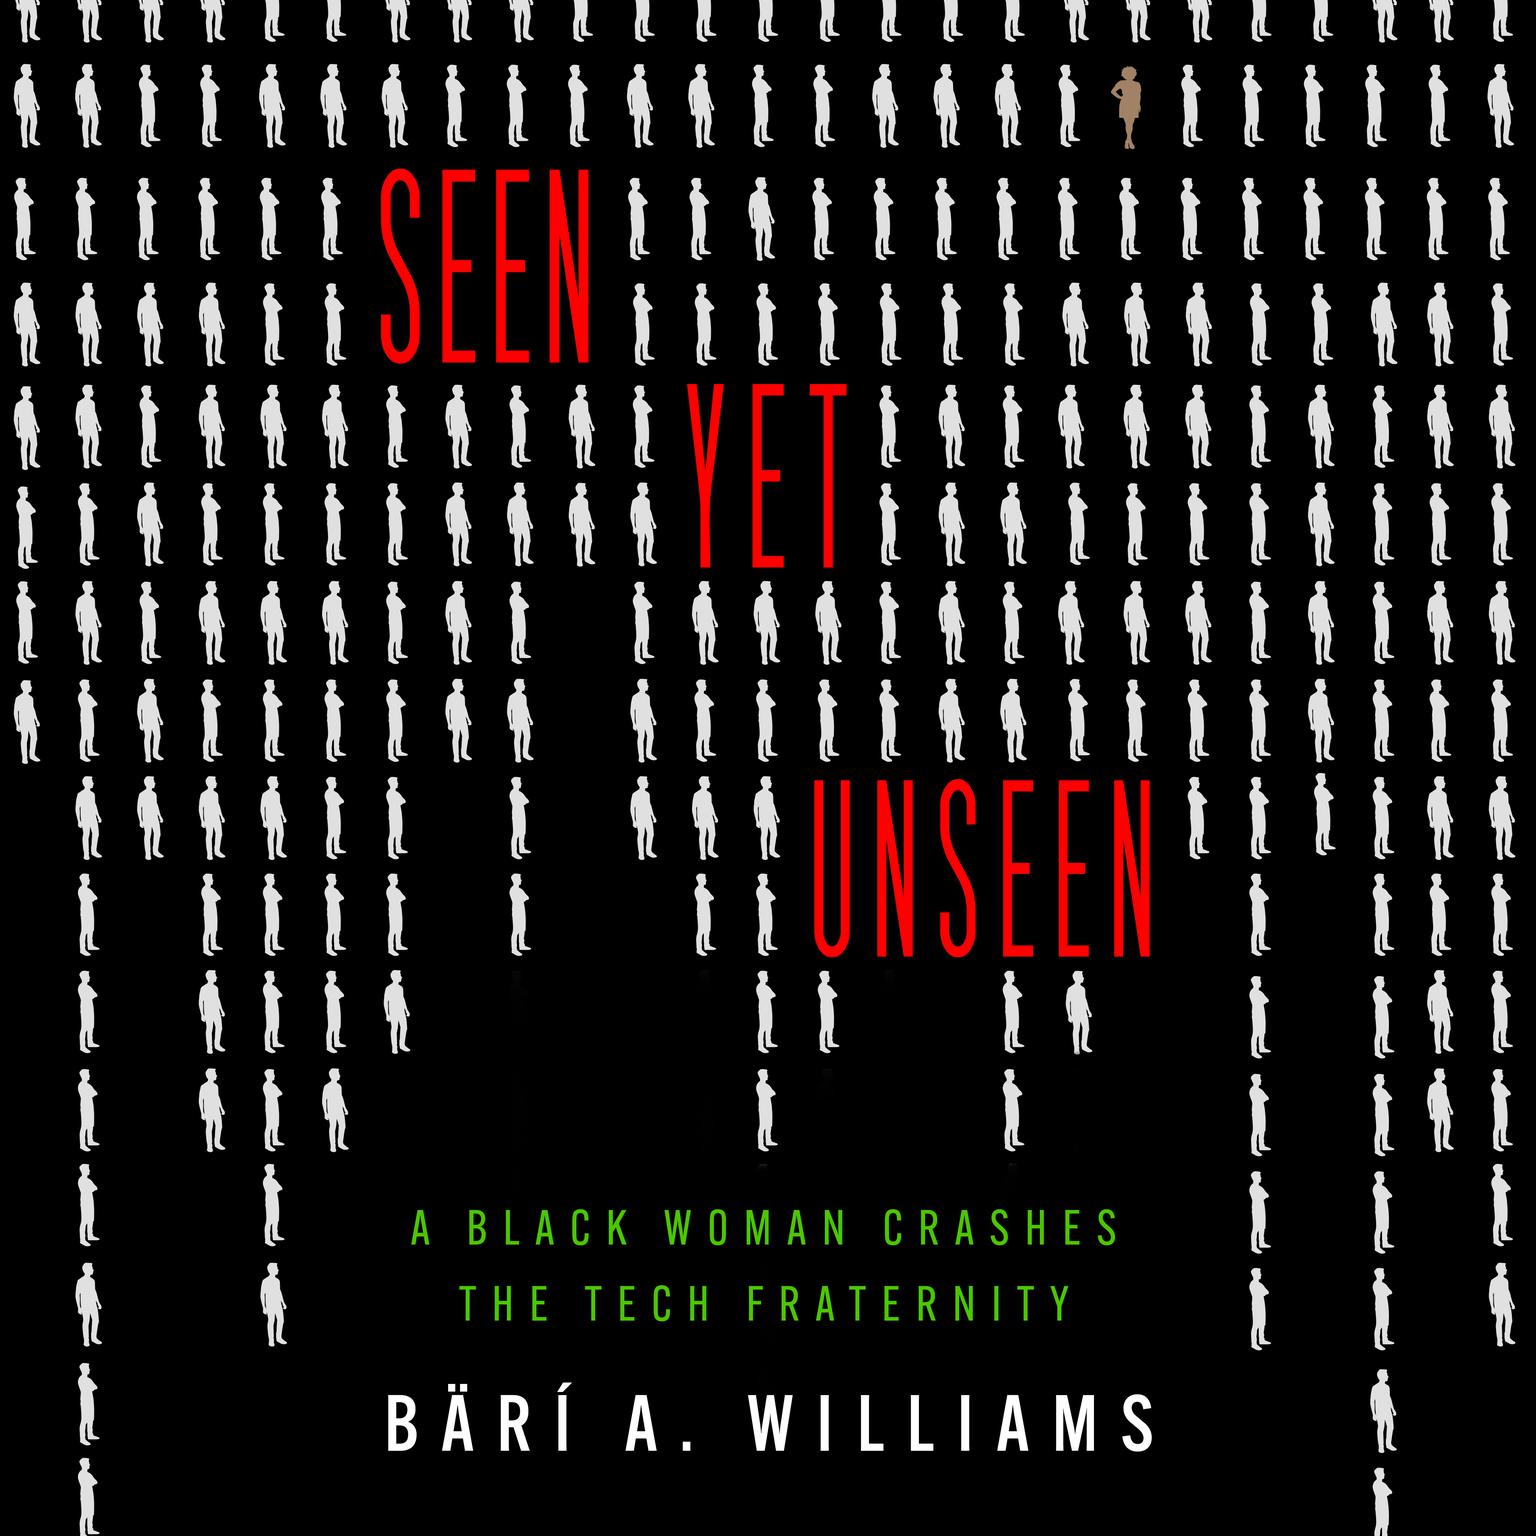 Seen Yet Unseen: A Black Woman Crashes the Tech Fraternity Audiobook, by Bärí A. Williams